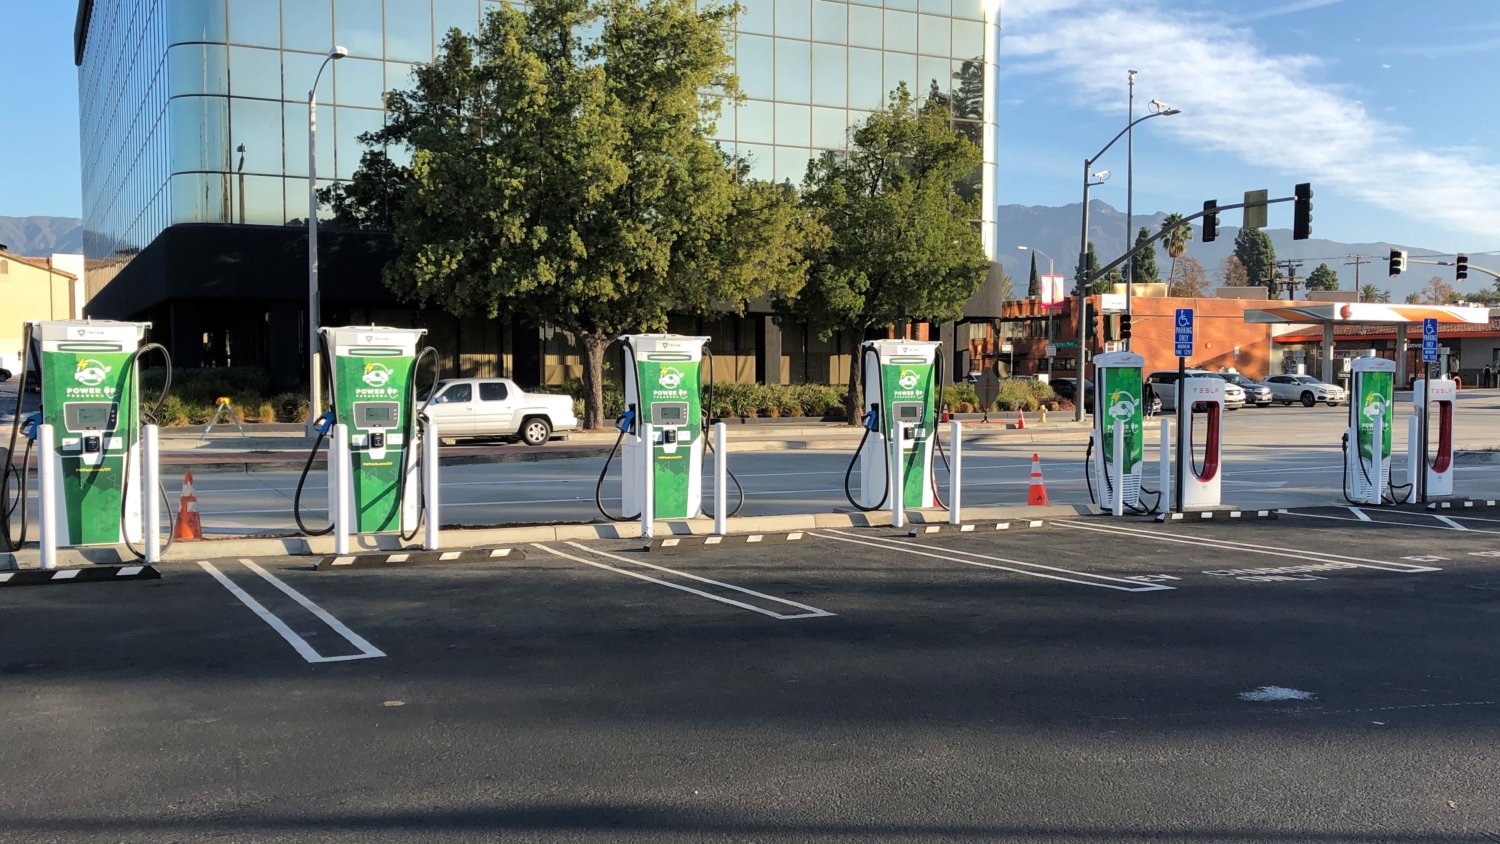 pasadena-s-new-fast-charging-ev-station-electric-cars-charge-up-the